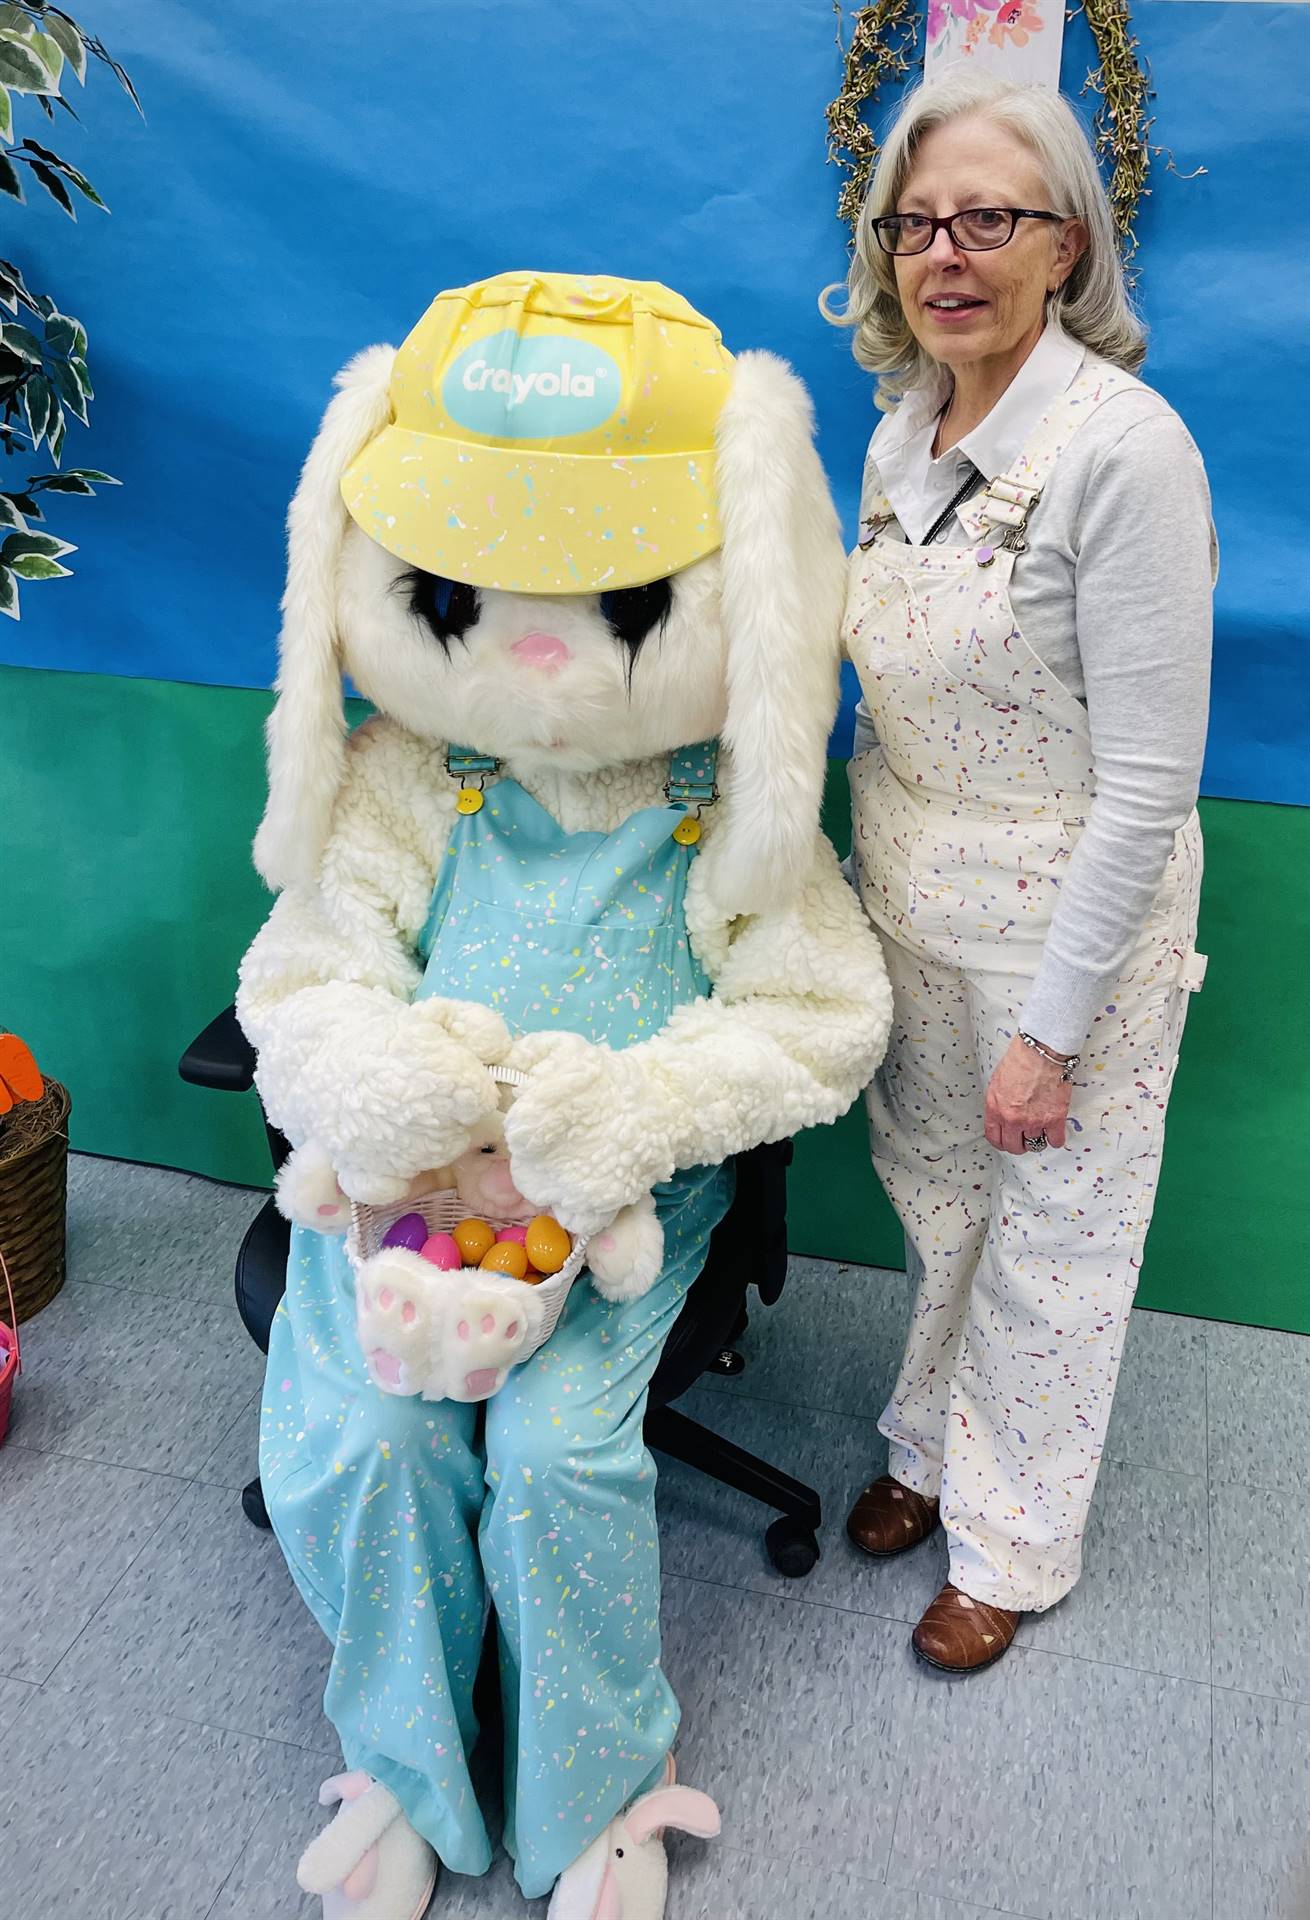 An adult stands to adult dressed up as a Spring bunny